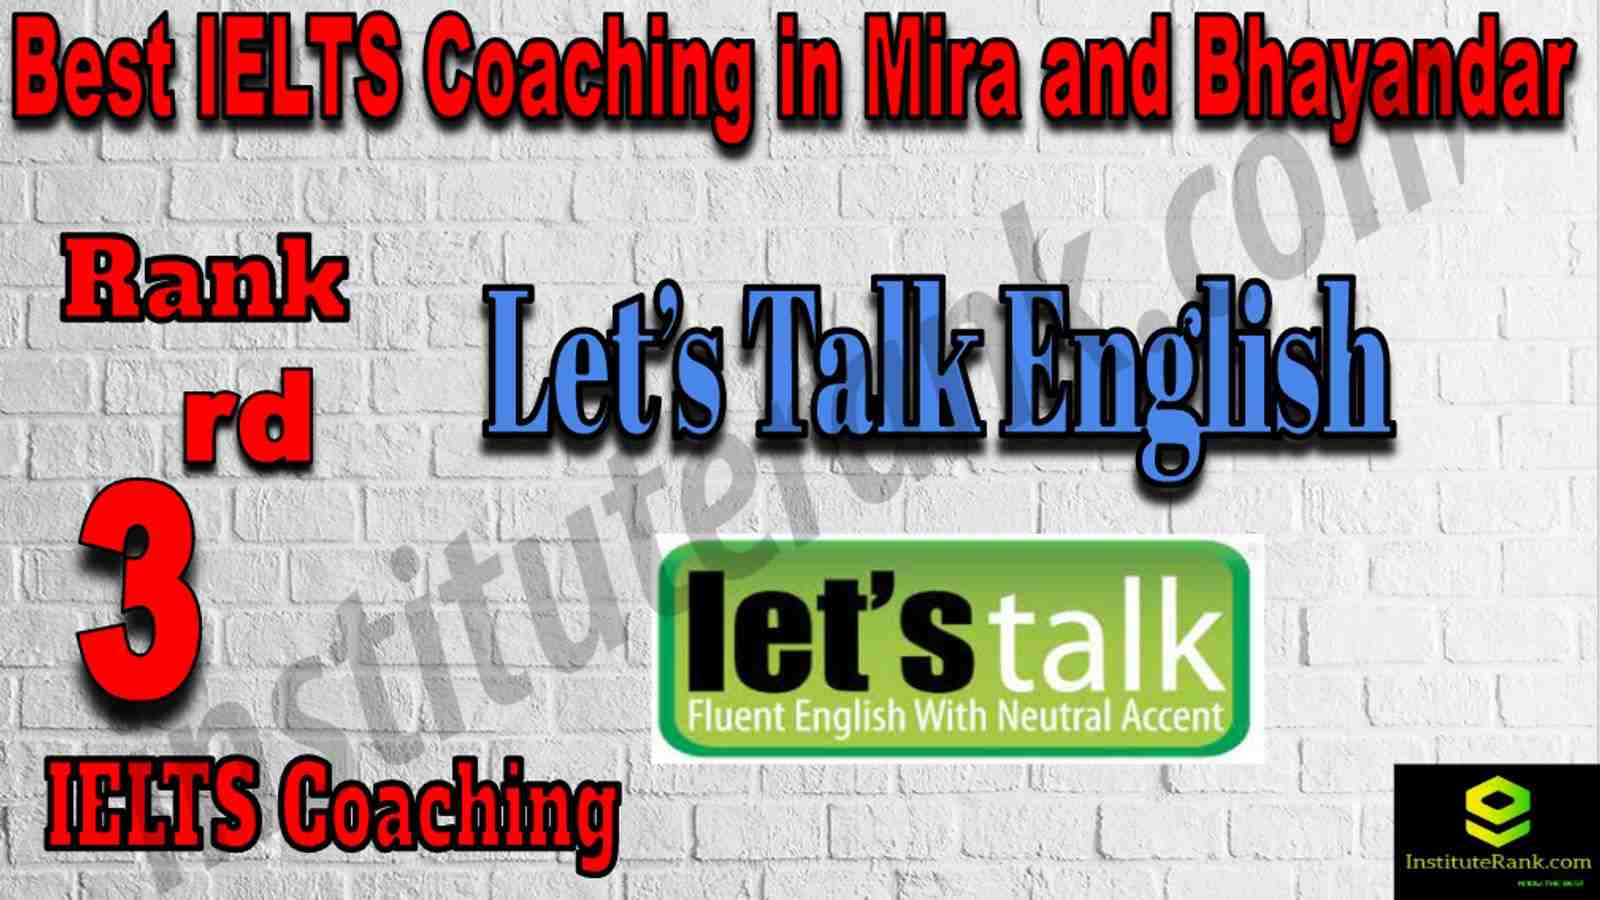 3rd Best IELTS Coaching in Mira and Bhayandar